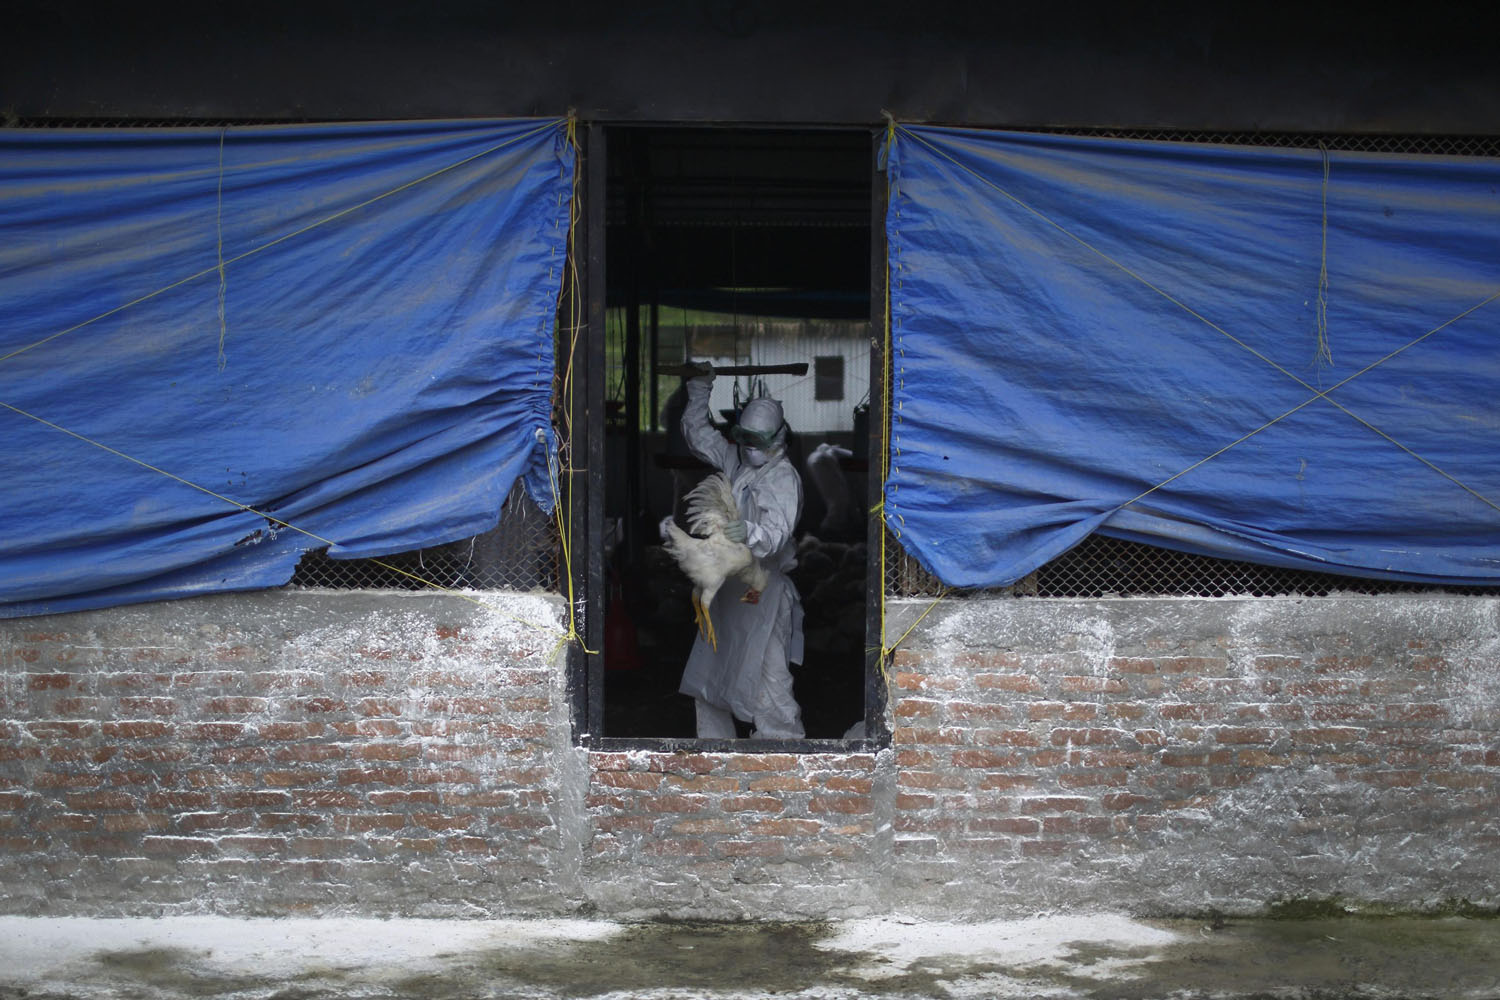 Aug. 2, 2013. A member of a Rapid Response Team (RRT) culls a rooster at a poultry farm infected with the H5N1 bird flu virus in Bhaktapur, Nepal.